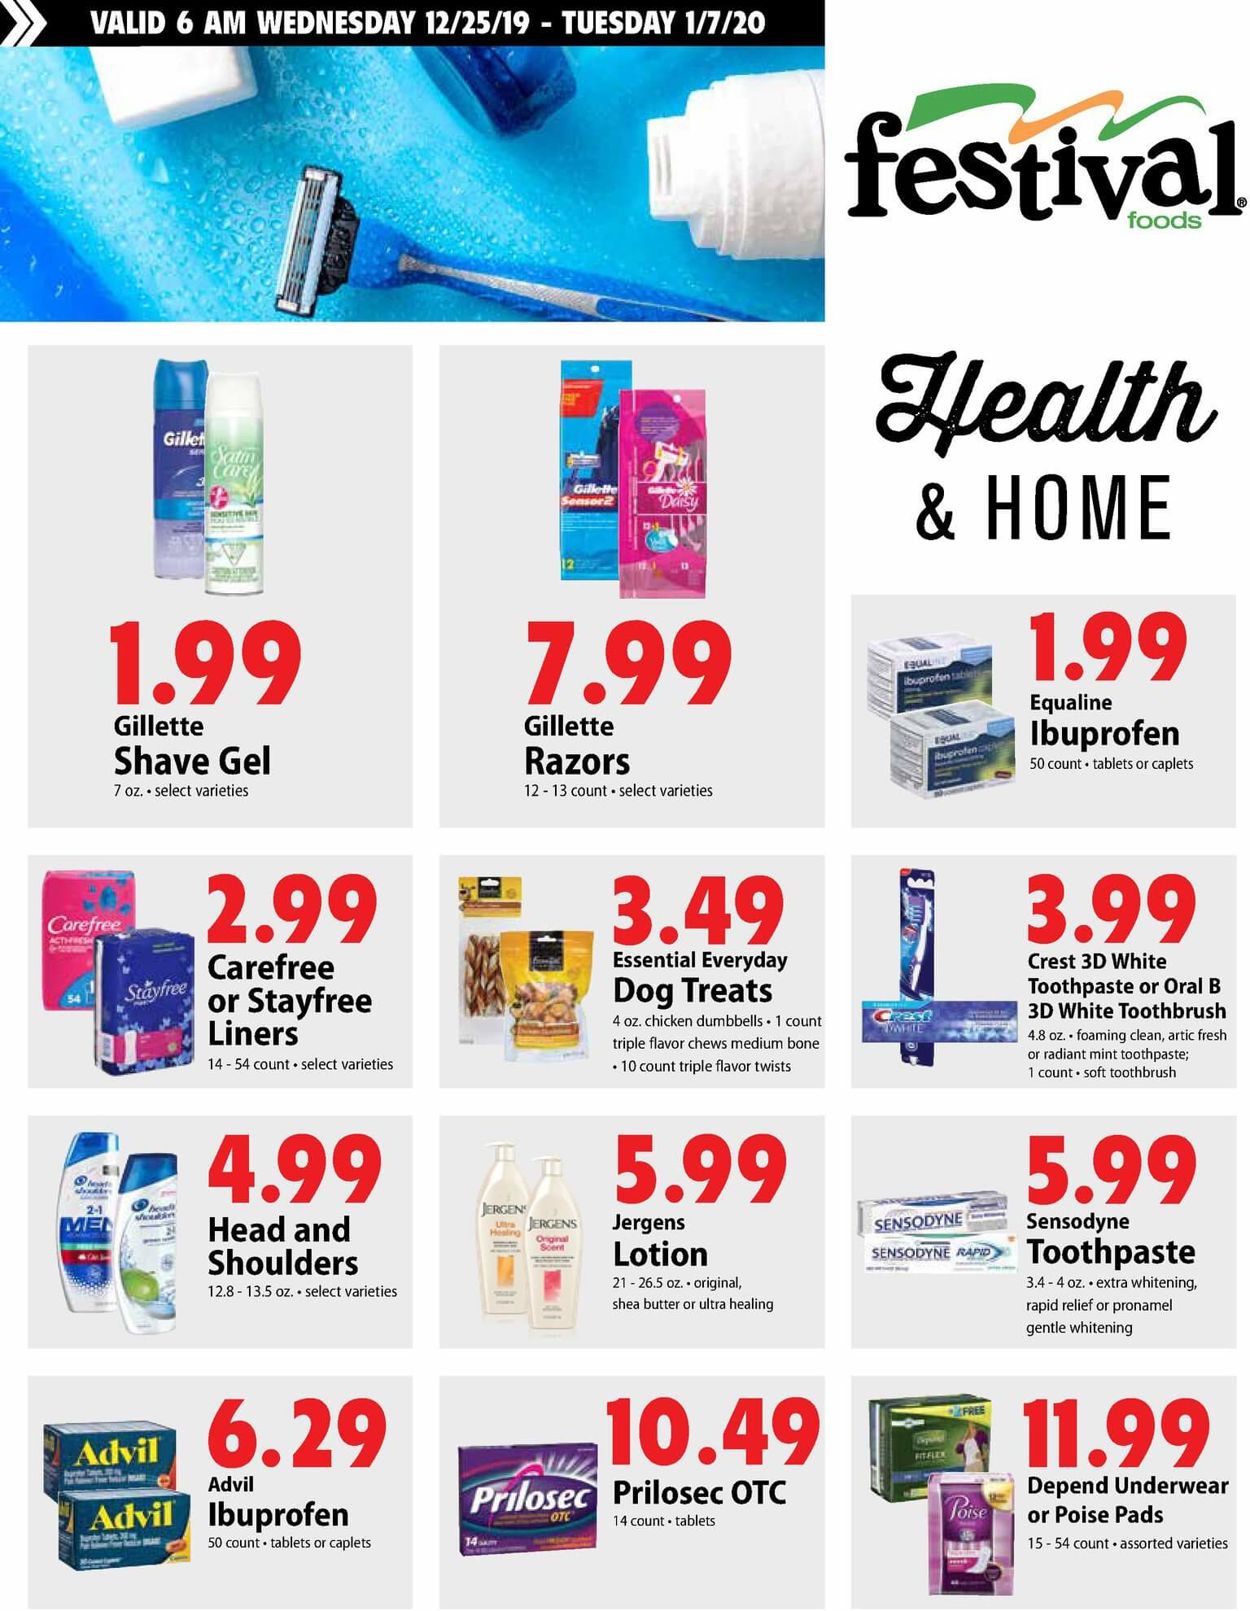 Festival Foods - New Year's Ad 2019/2020 Weekly Ad Circular - valid 12/25-12/31/2019 (Page 10)